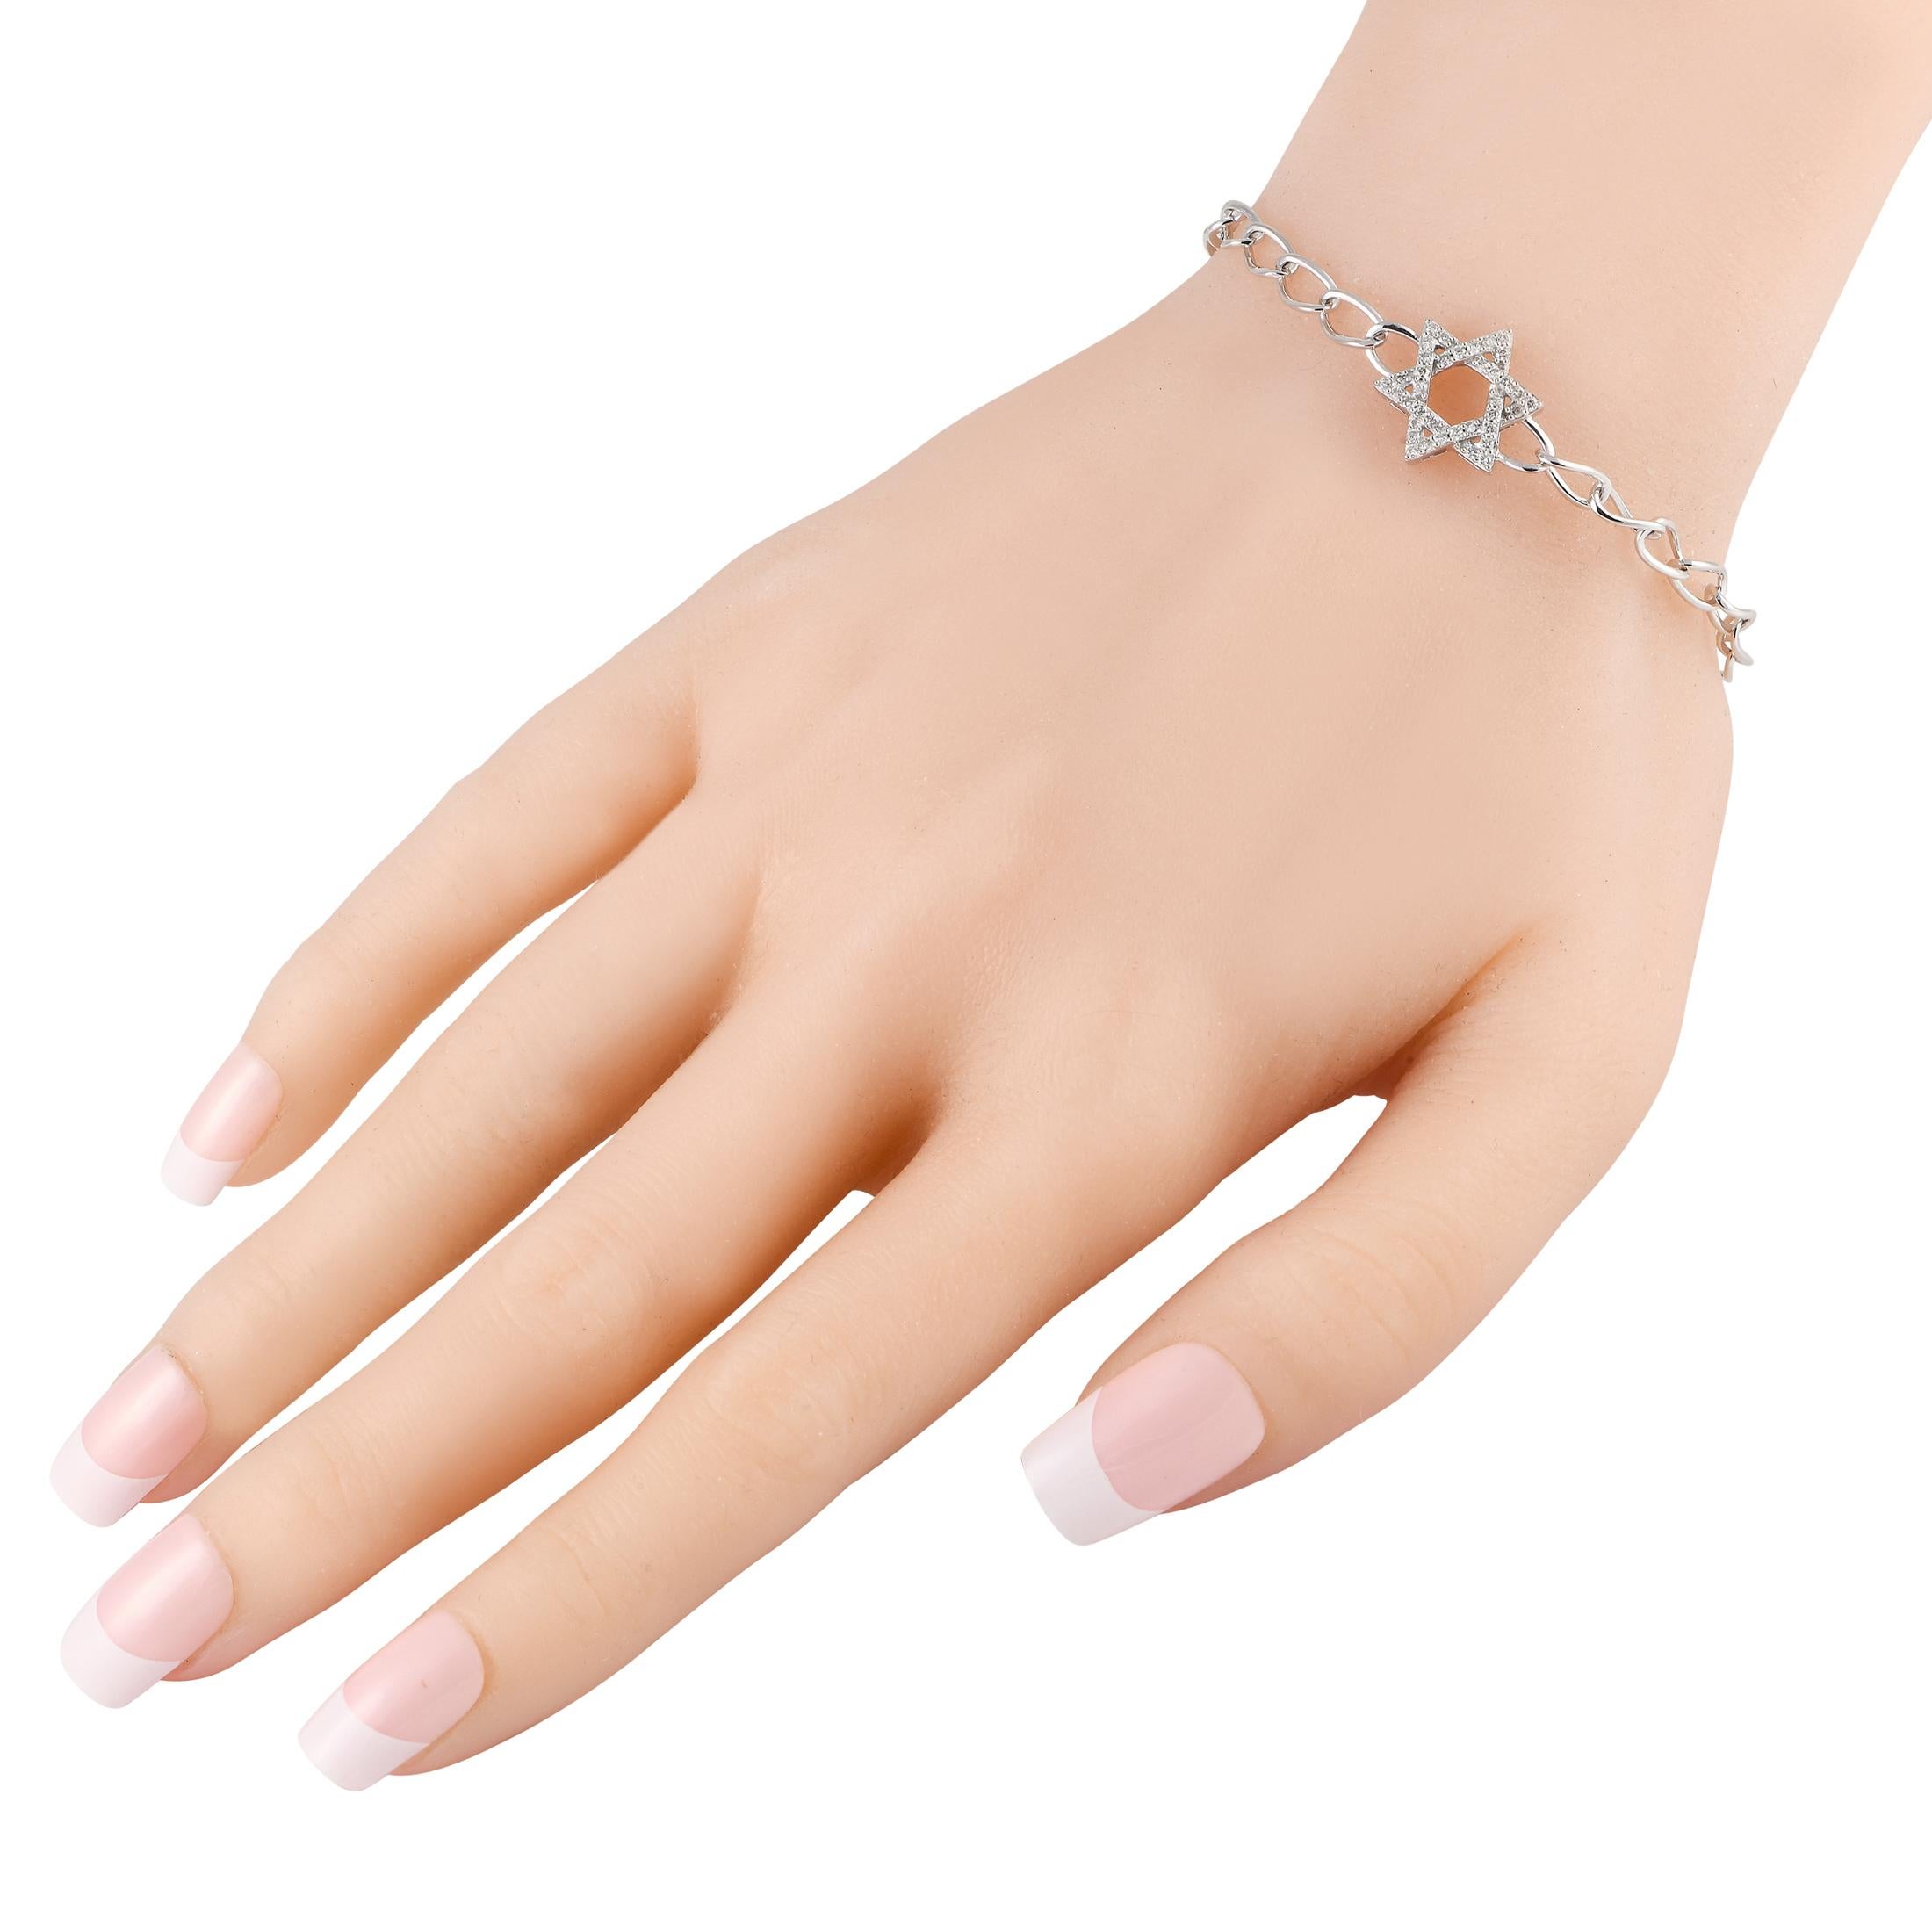 A six-pointed star makes a statement at the center of this simple, elegant bracelet. Crafted from 14K white gold, the star shaped pendant is elevated by sparkling inset diamonds totaling 0.30 carats. It measures 7.0 long and comes complete with